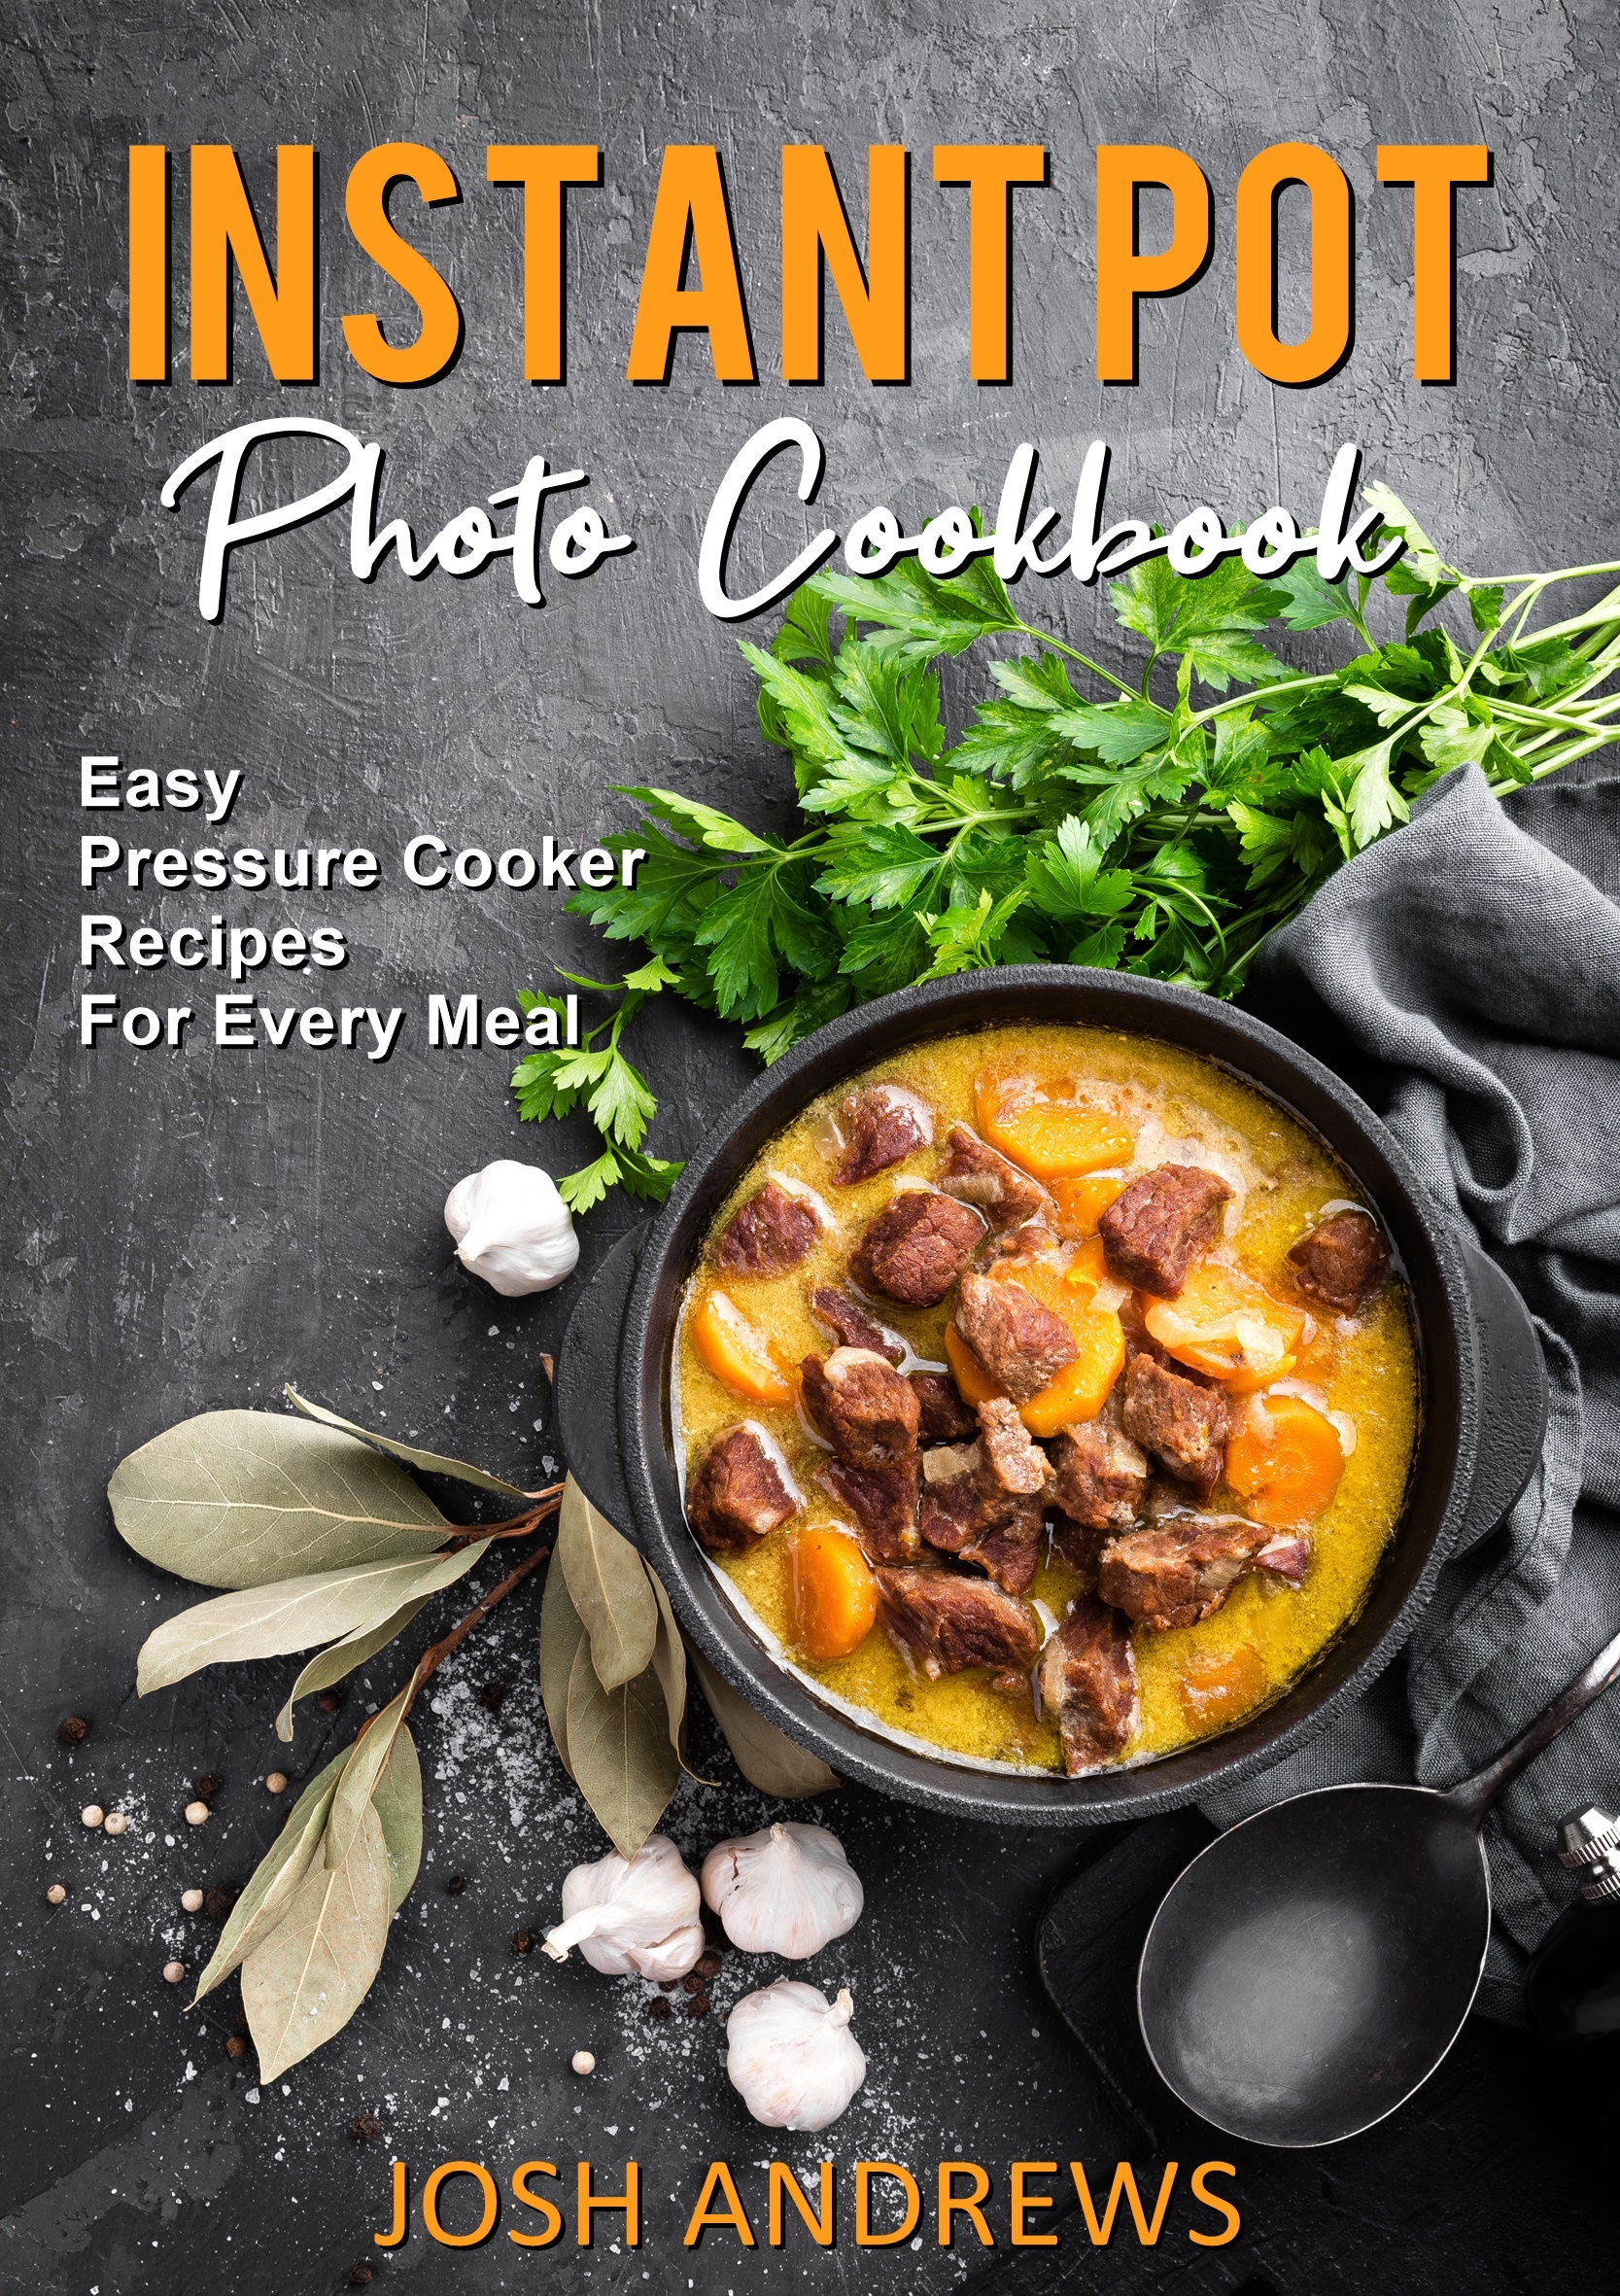 FREE: Instant Pot Photo Cookbook – Easy Pressure Cooker Recipes For Every Meal by Josh Andrews